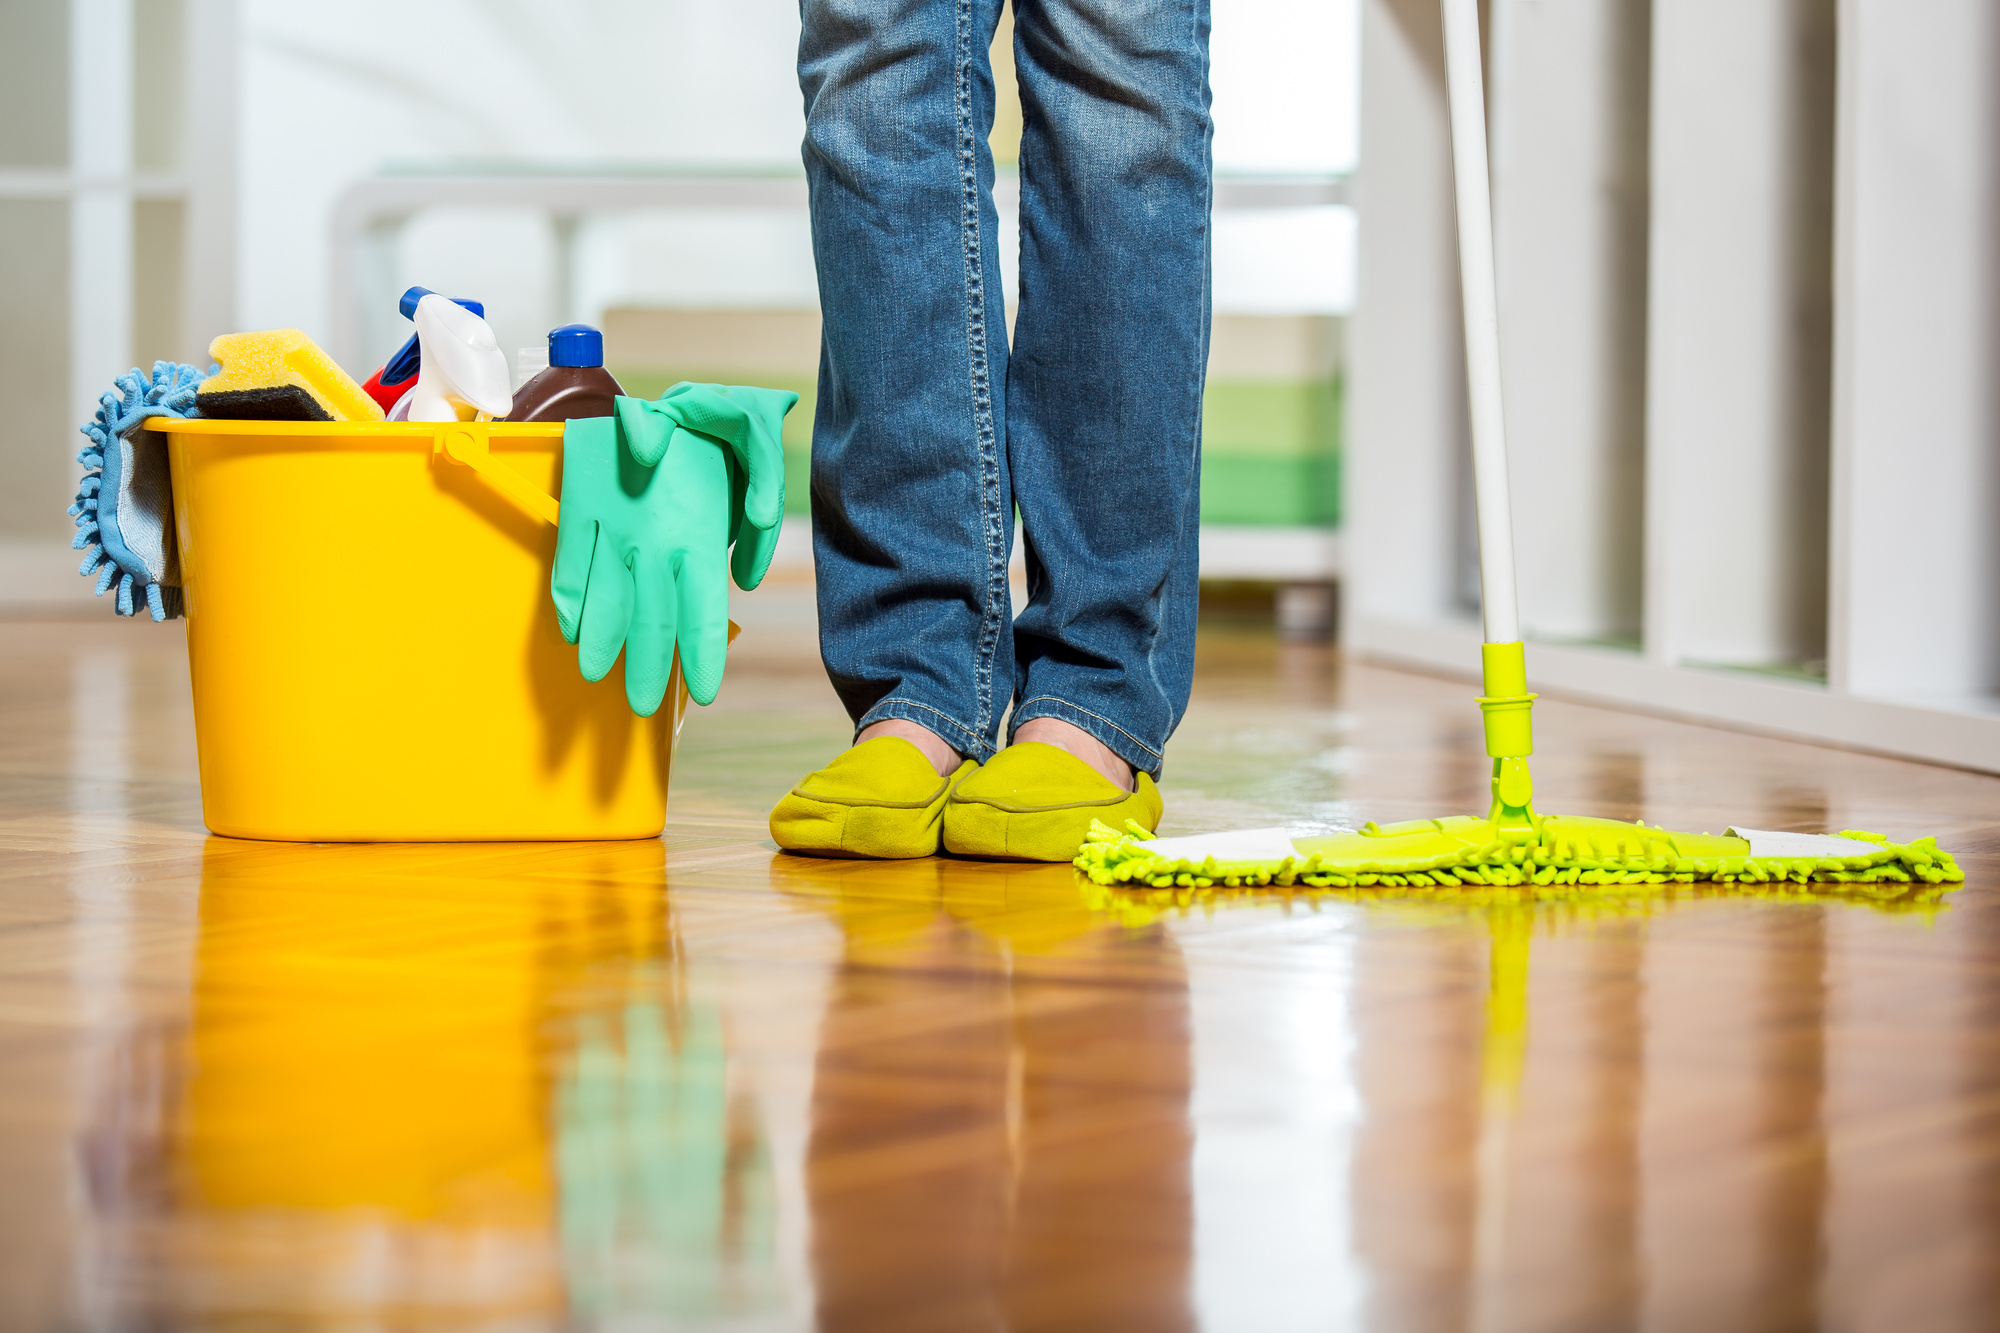 If you want to get the most out of your cleaning services, it's important to prepare. Follow this guide on how to prepare for a house deep cleaning service.